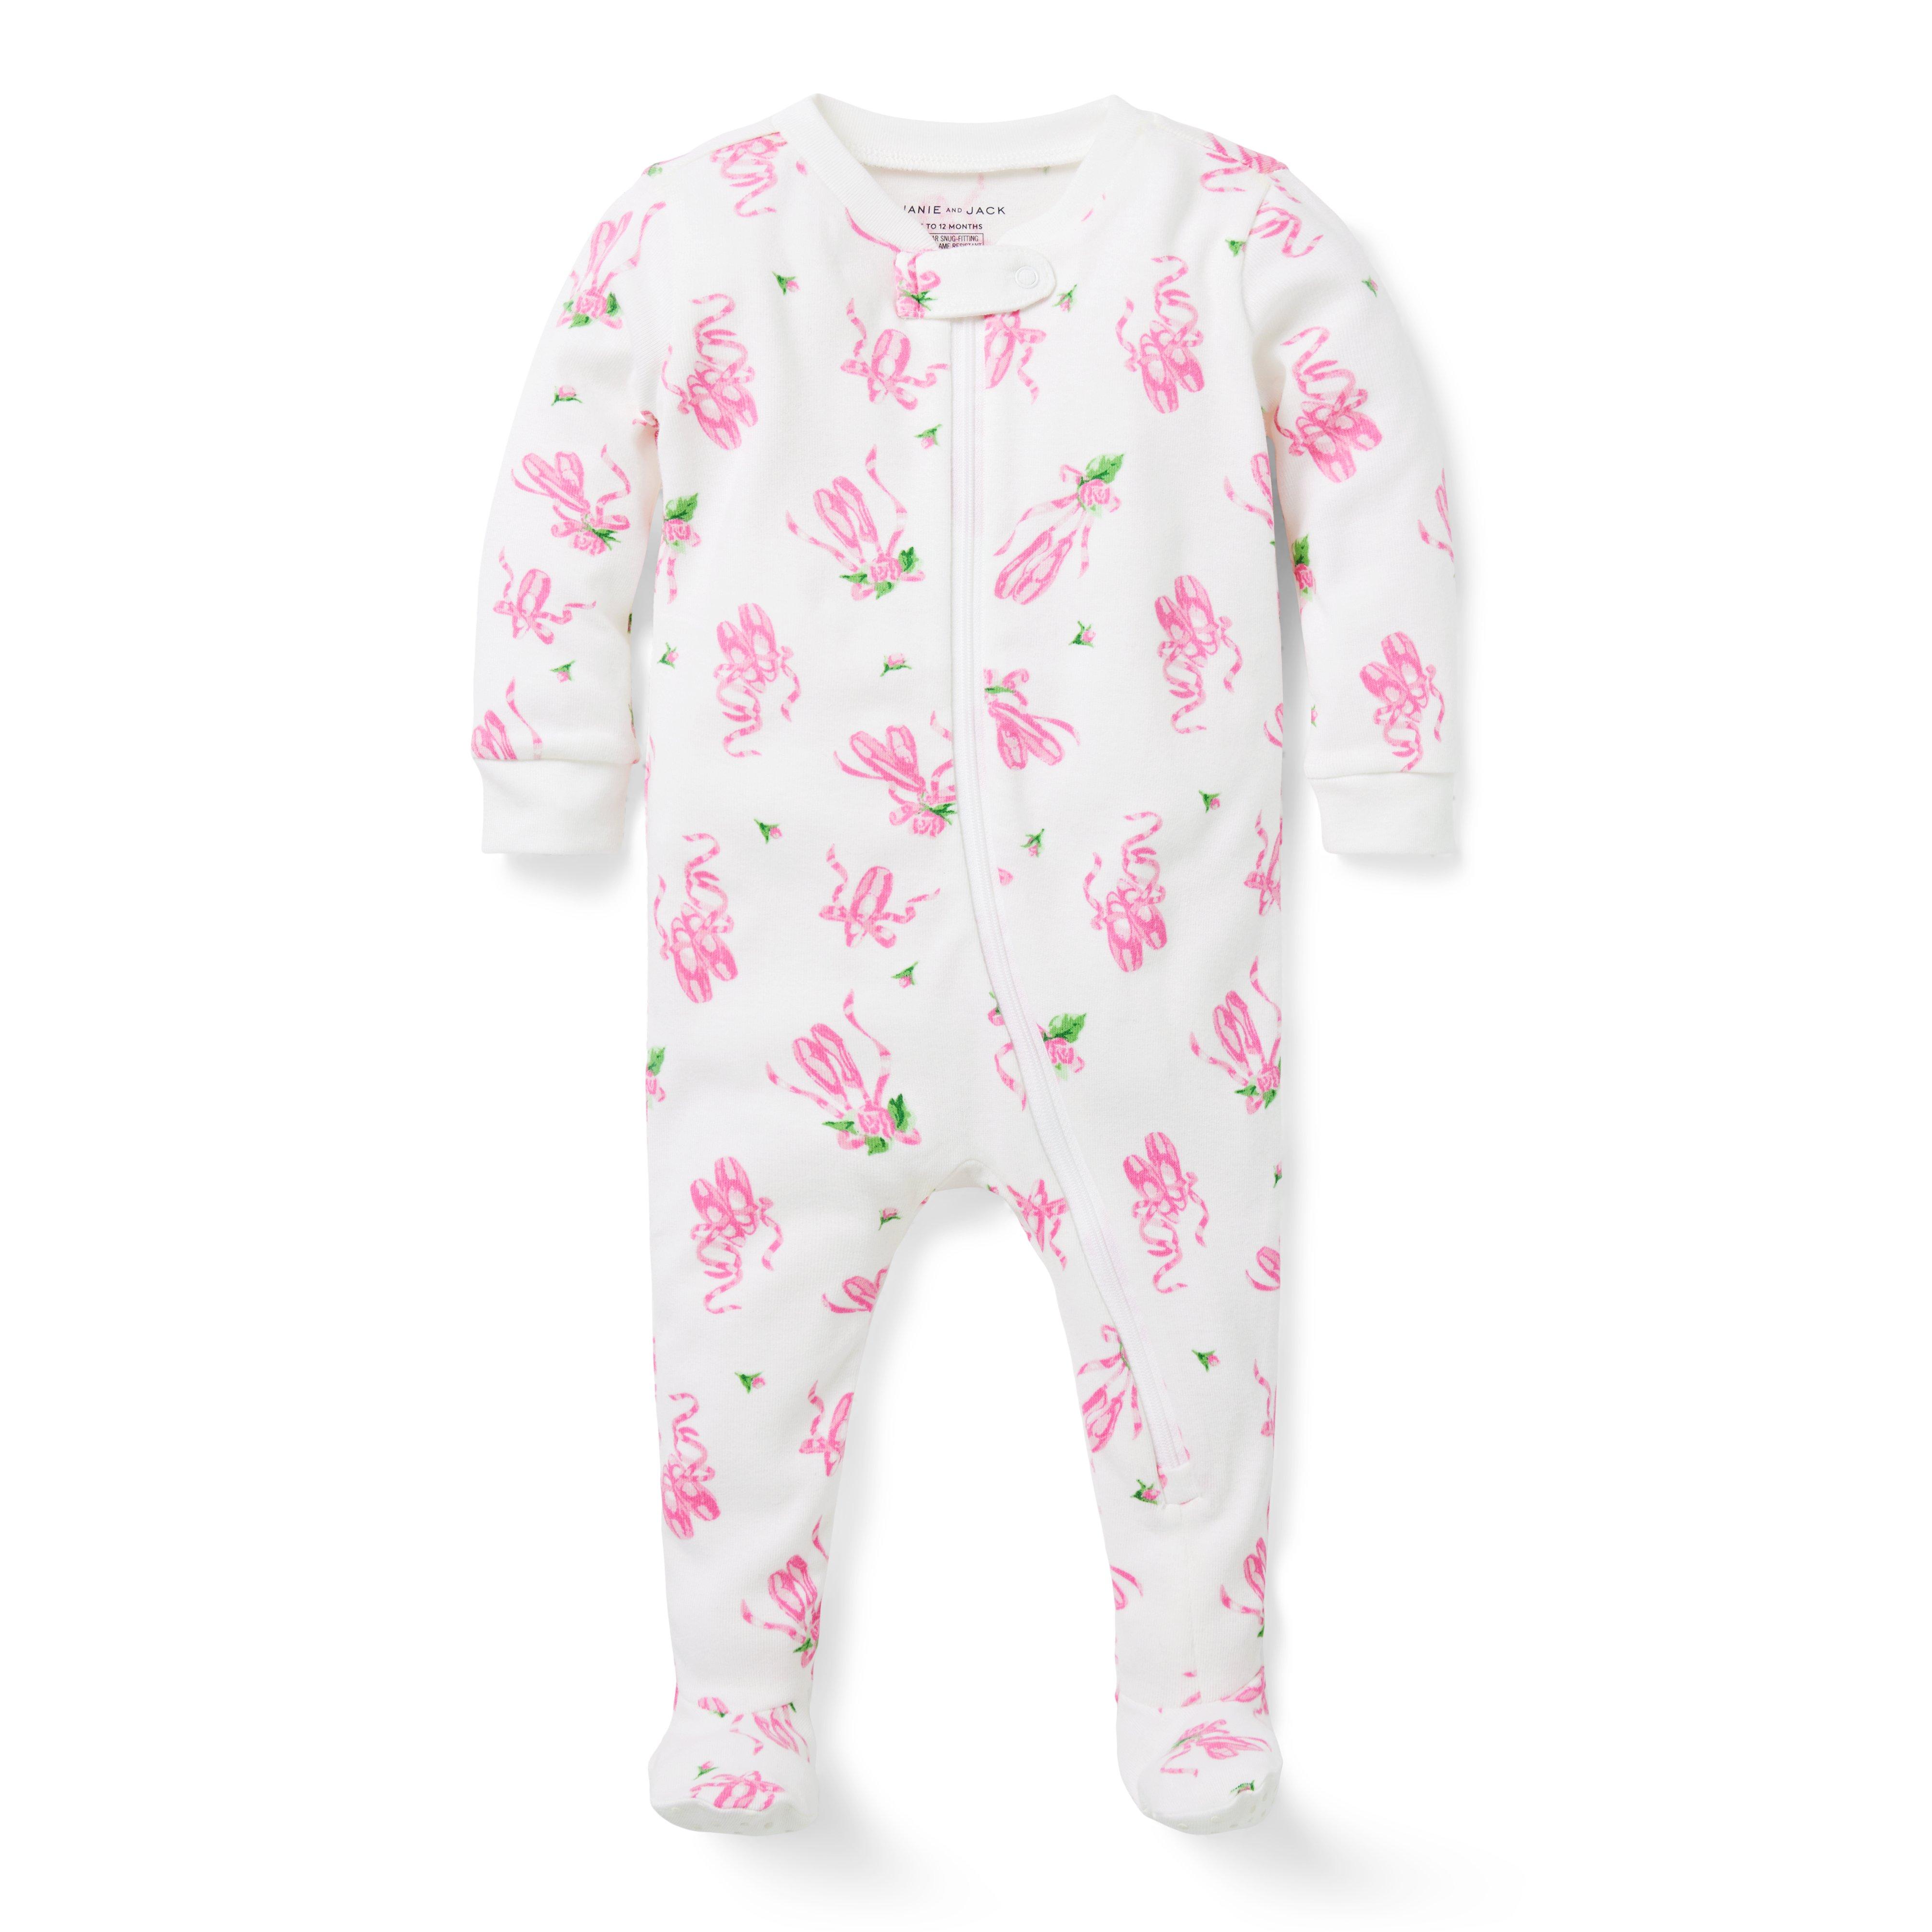 Baby Good Night Footed Pajama In Ballet Slipper